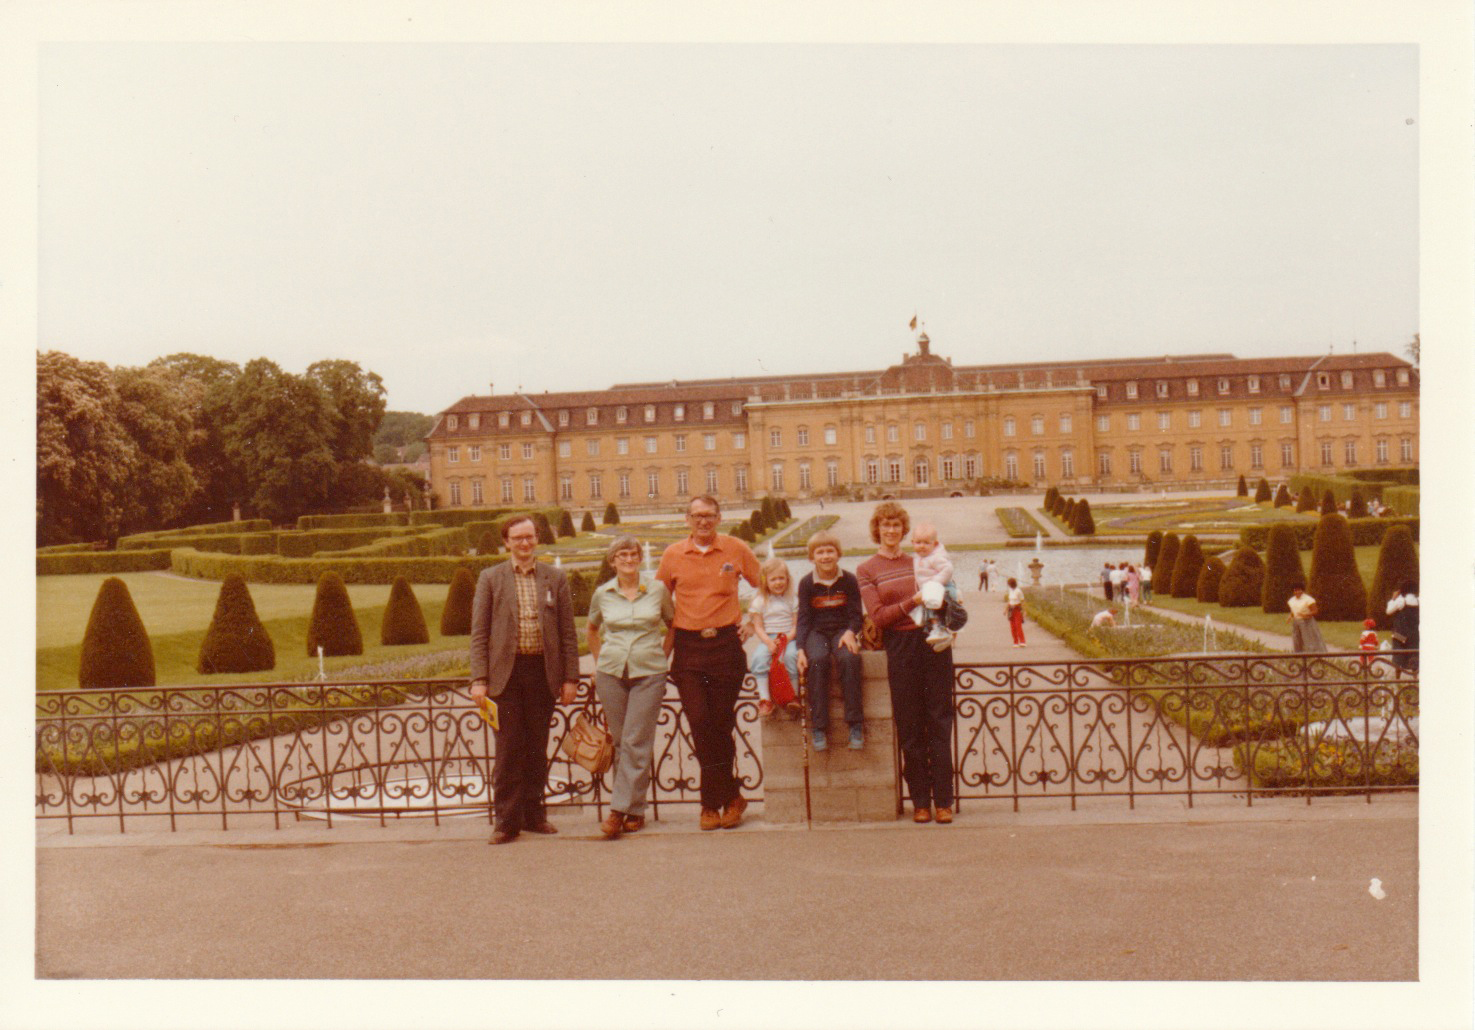 My mom with me, David, Heidi, and Grandma and Grandpa with their friend in Stuttgart